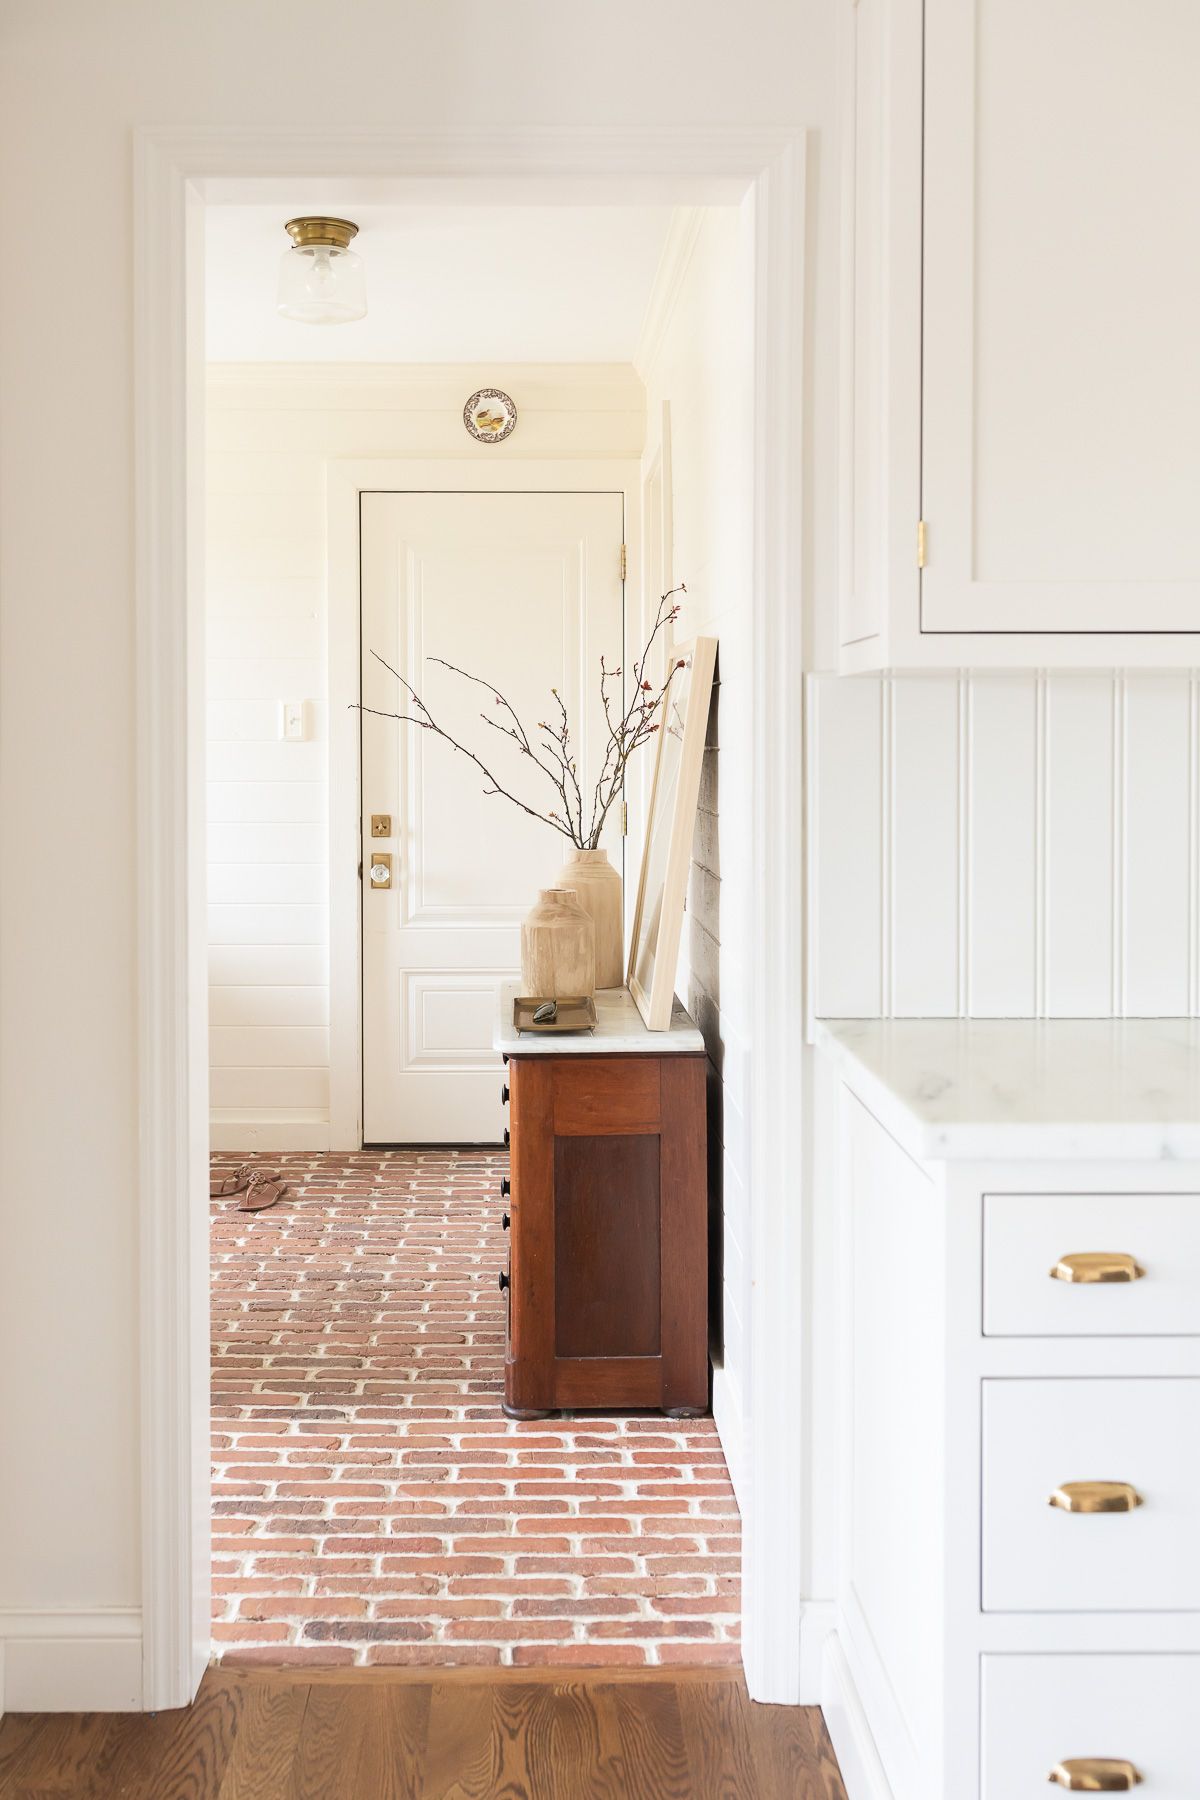 Looking into a mudroom painted in a neutral paint color, Sherwin Williams Navajo White